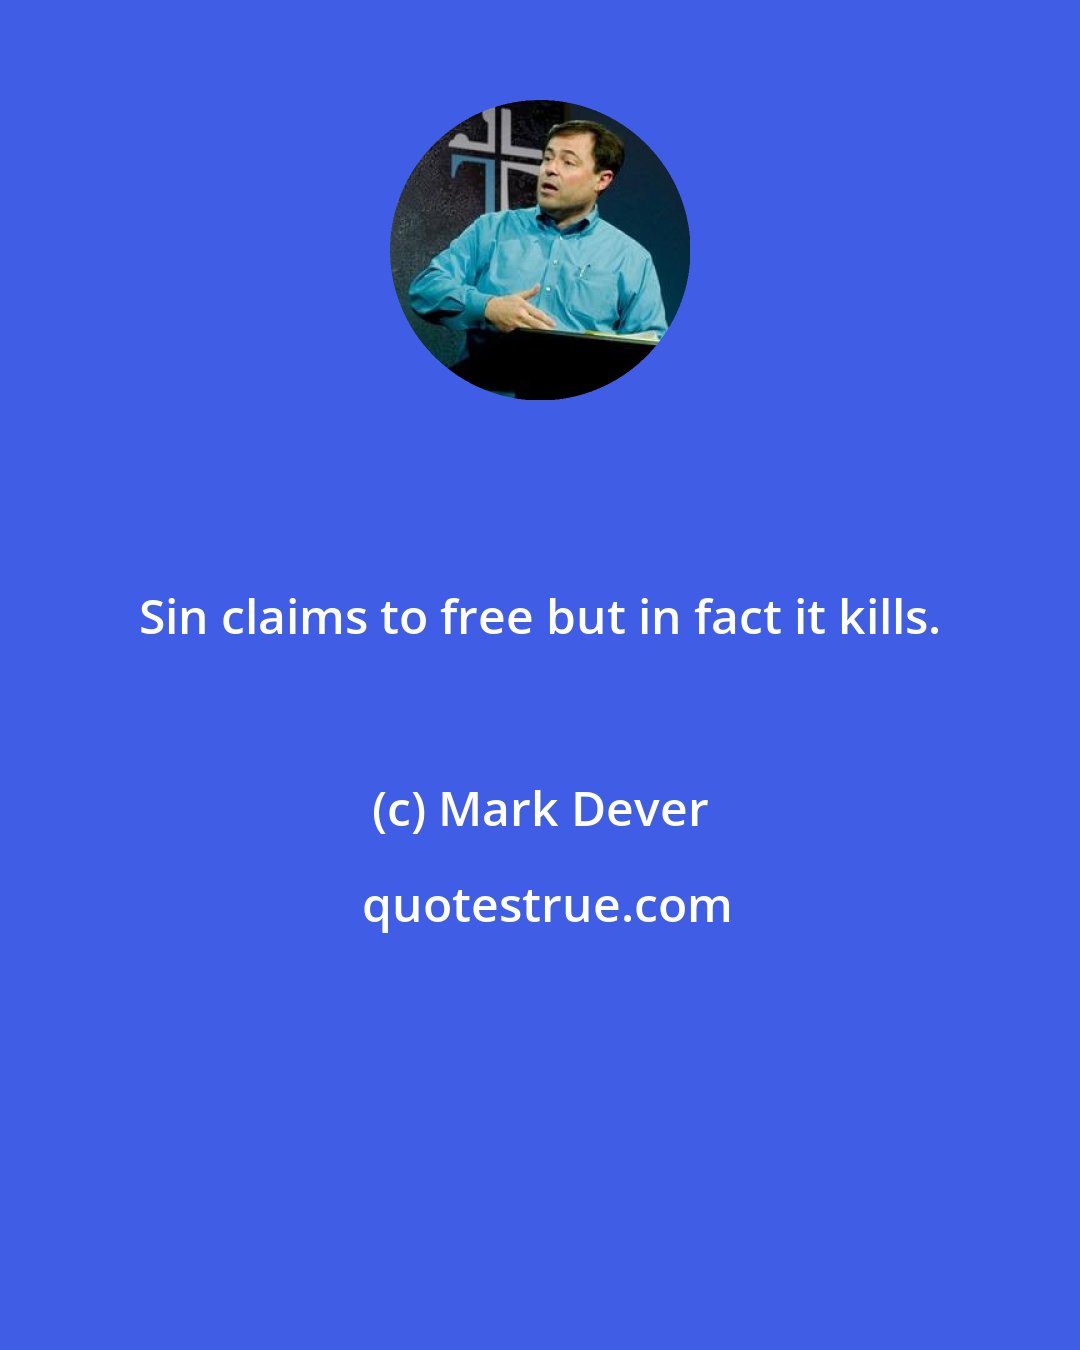 Mark Dever: Sin claims to free but in fact it kills.